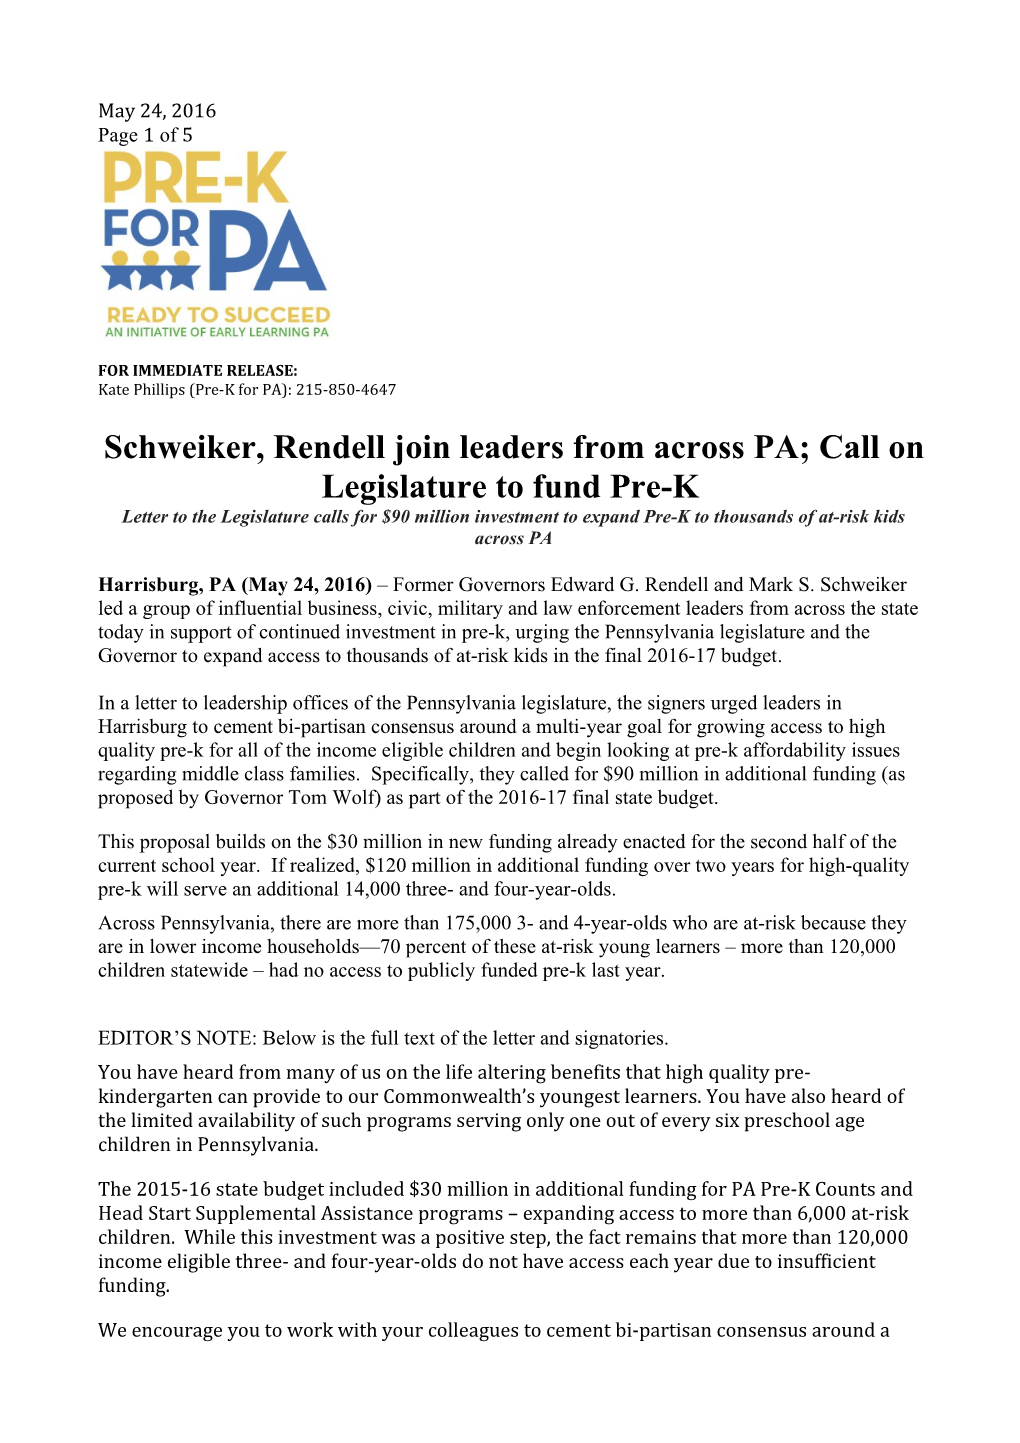 Schweiker, Rendell Join Leaders from Across PA; Call on Legislature to Fund Pre-K